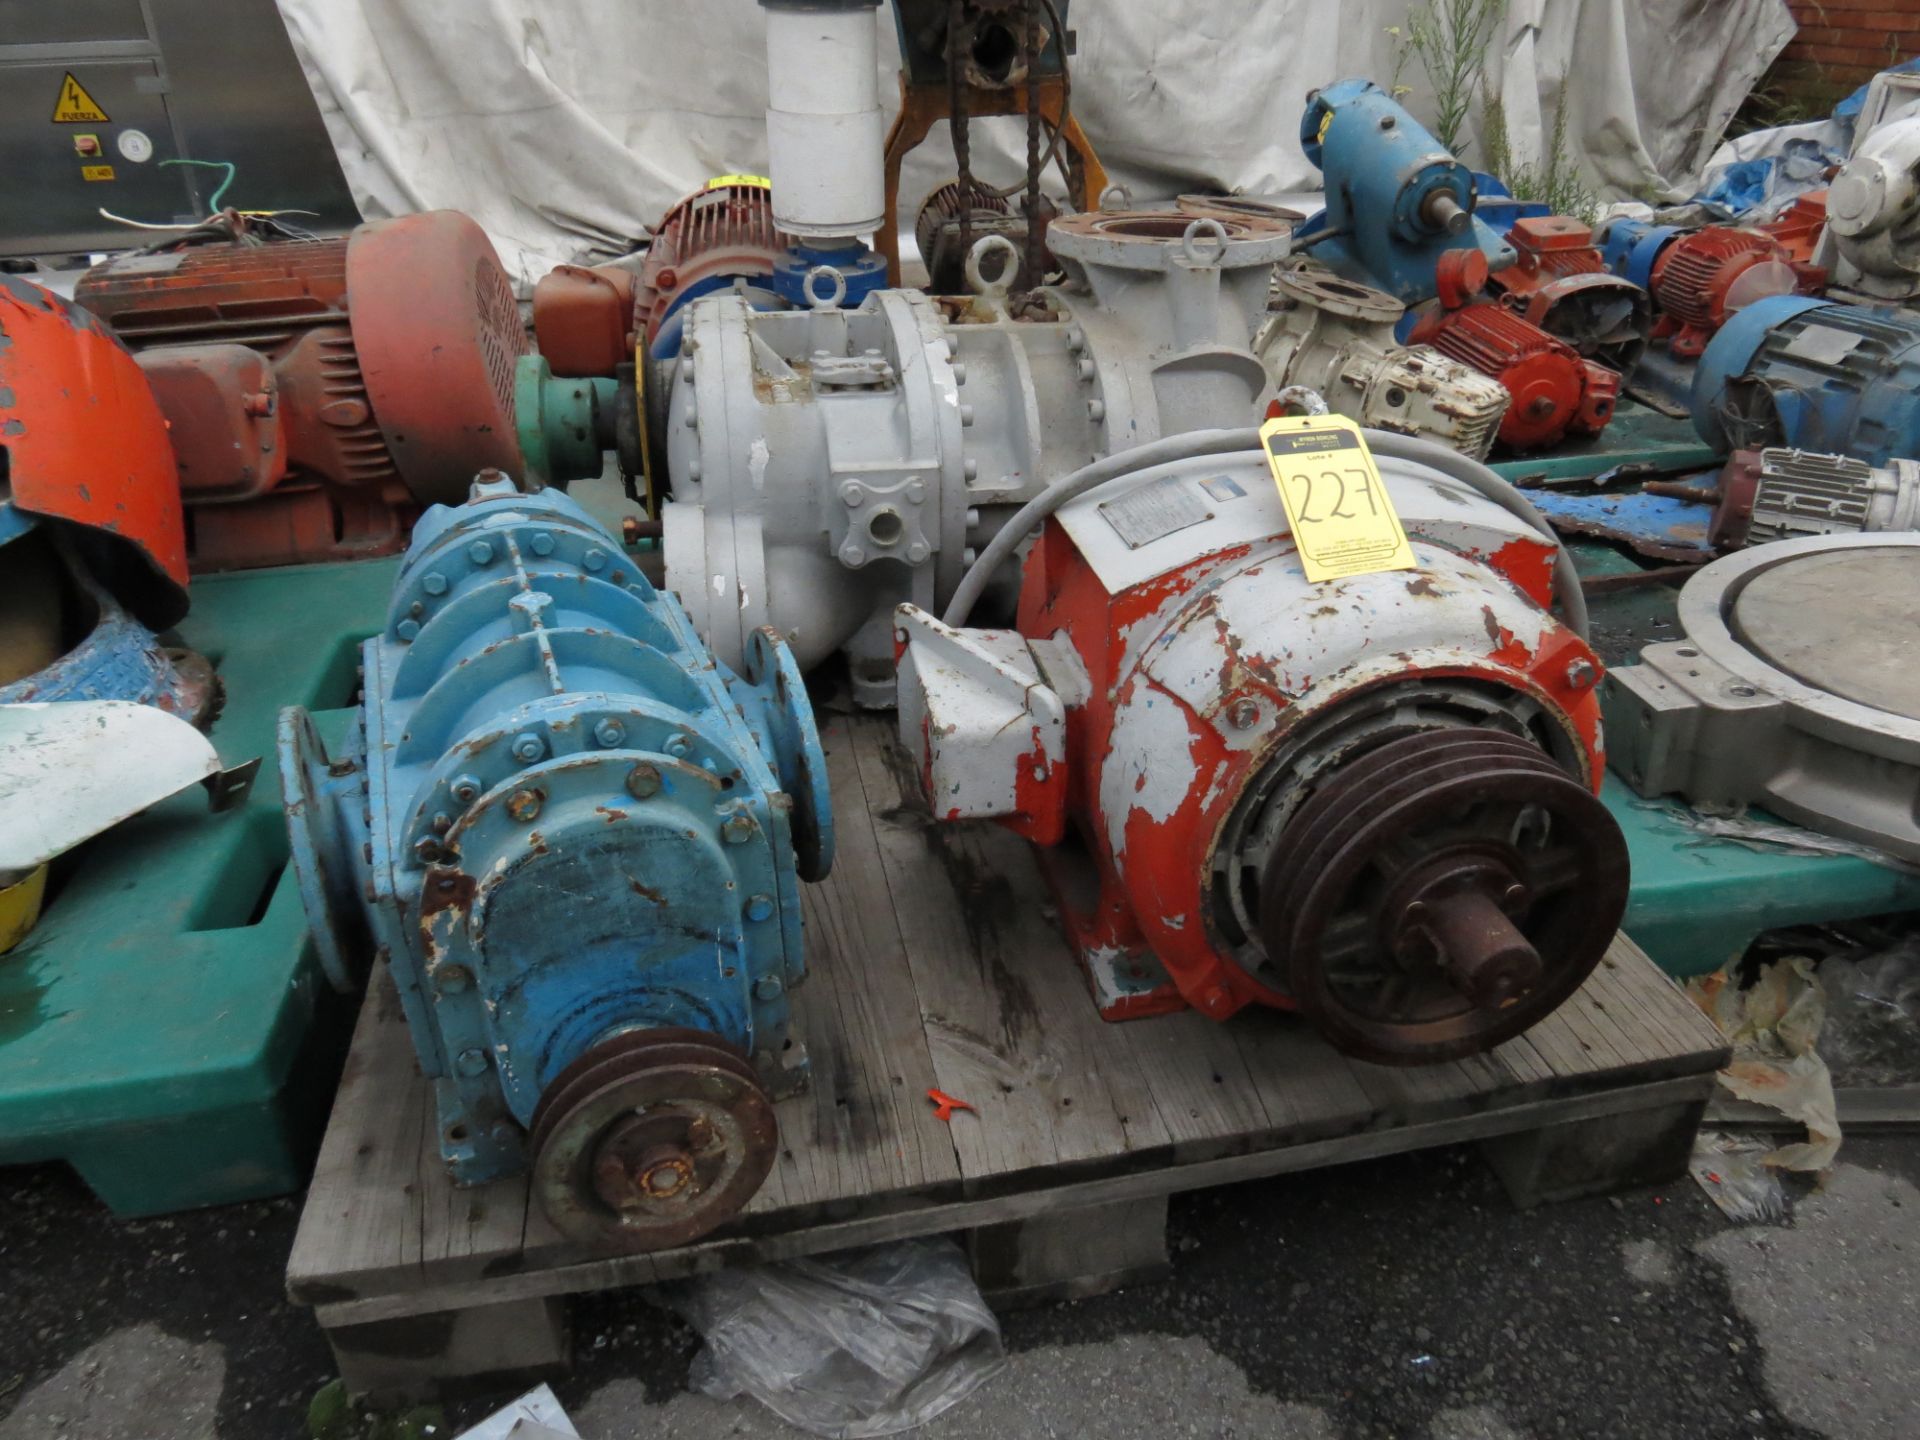 Electric Motor brand IEM, 40 HP, 220-440 V, Includes 2 Pumps - Image 4 of 8